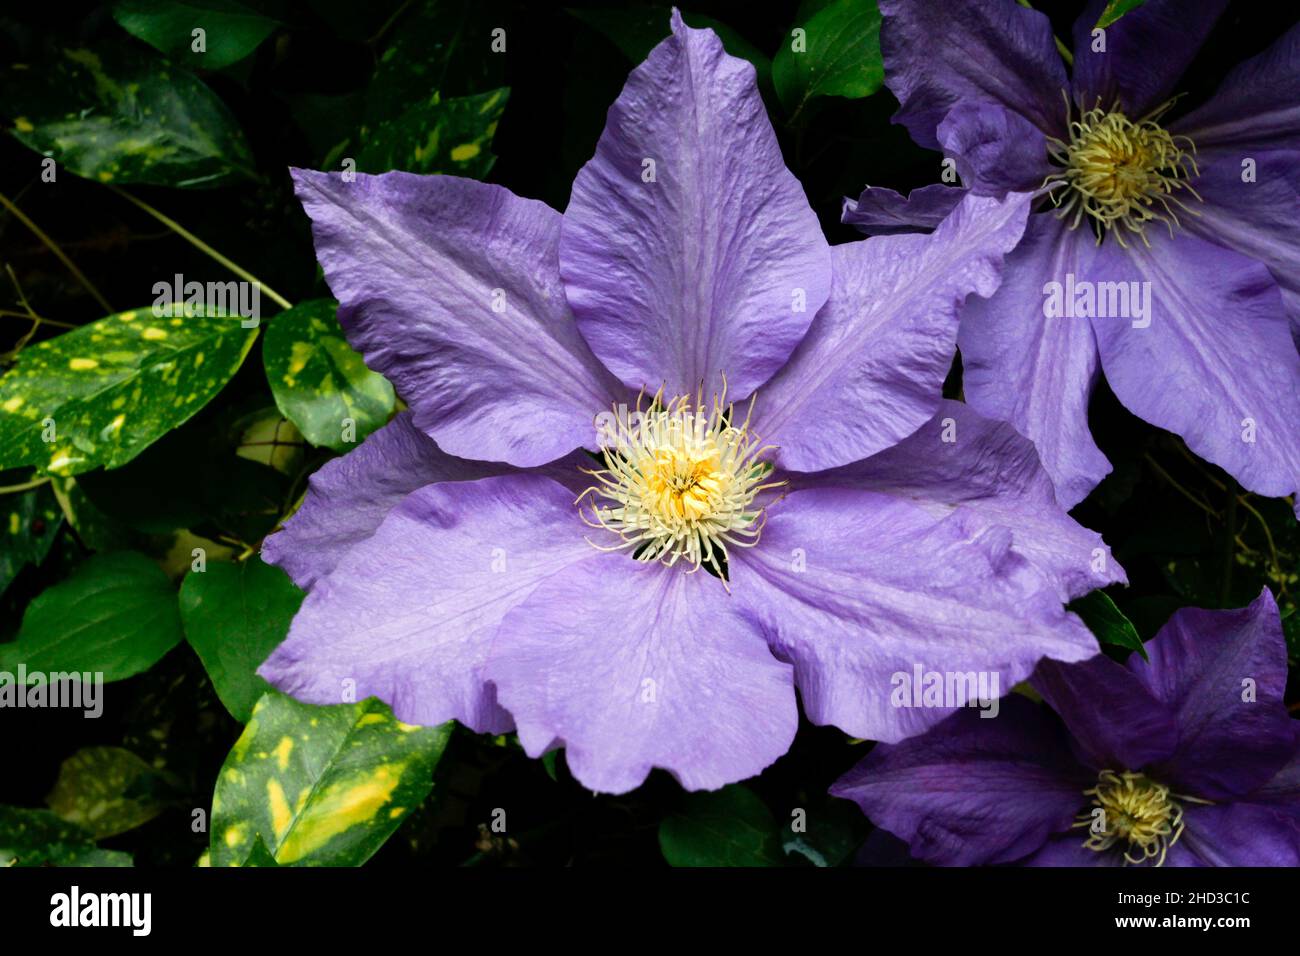 A close-up of a purple flower of a cultivated clematis plant/vine in a garden in Nanaimo, Vancouver Island, BC, Canada in June Stock Photo